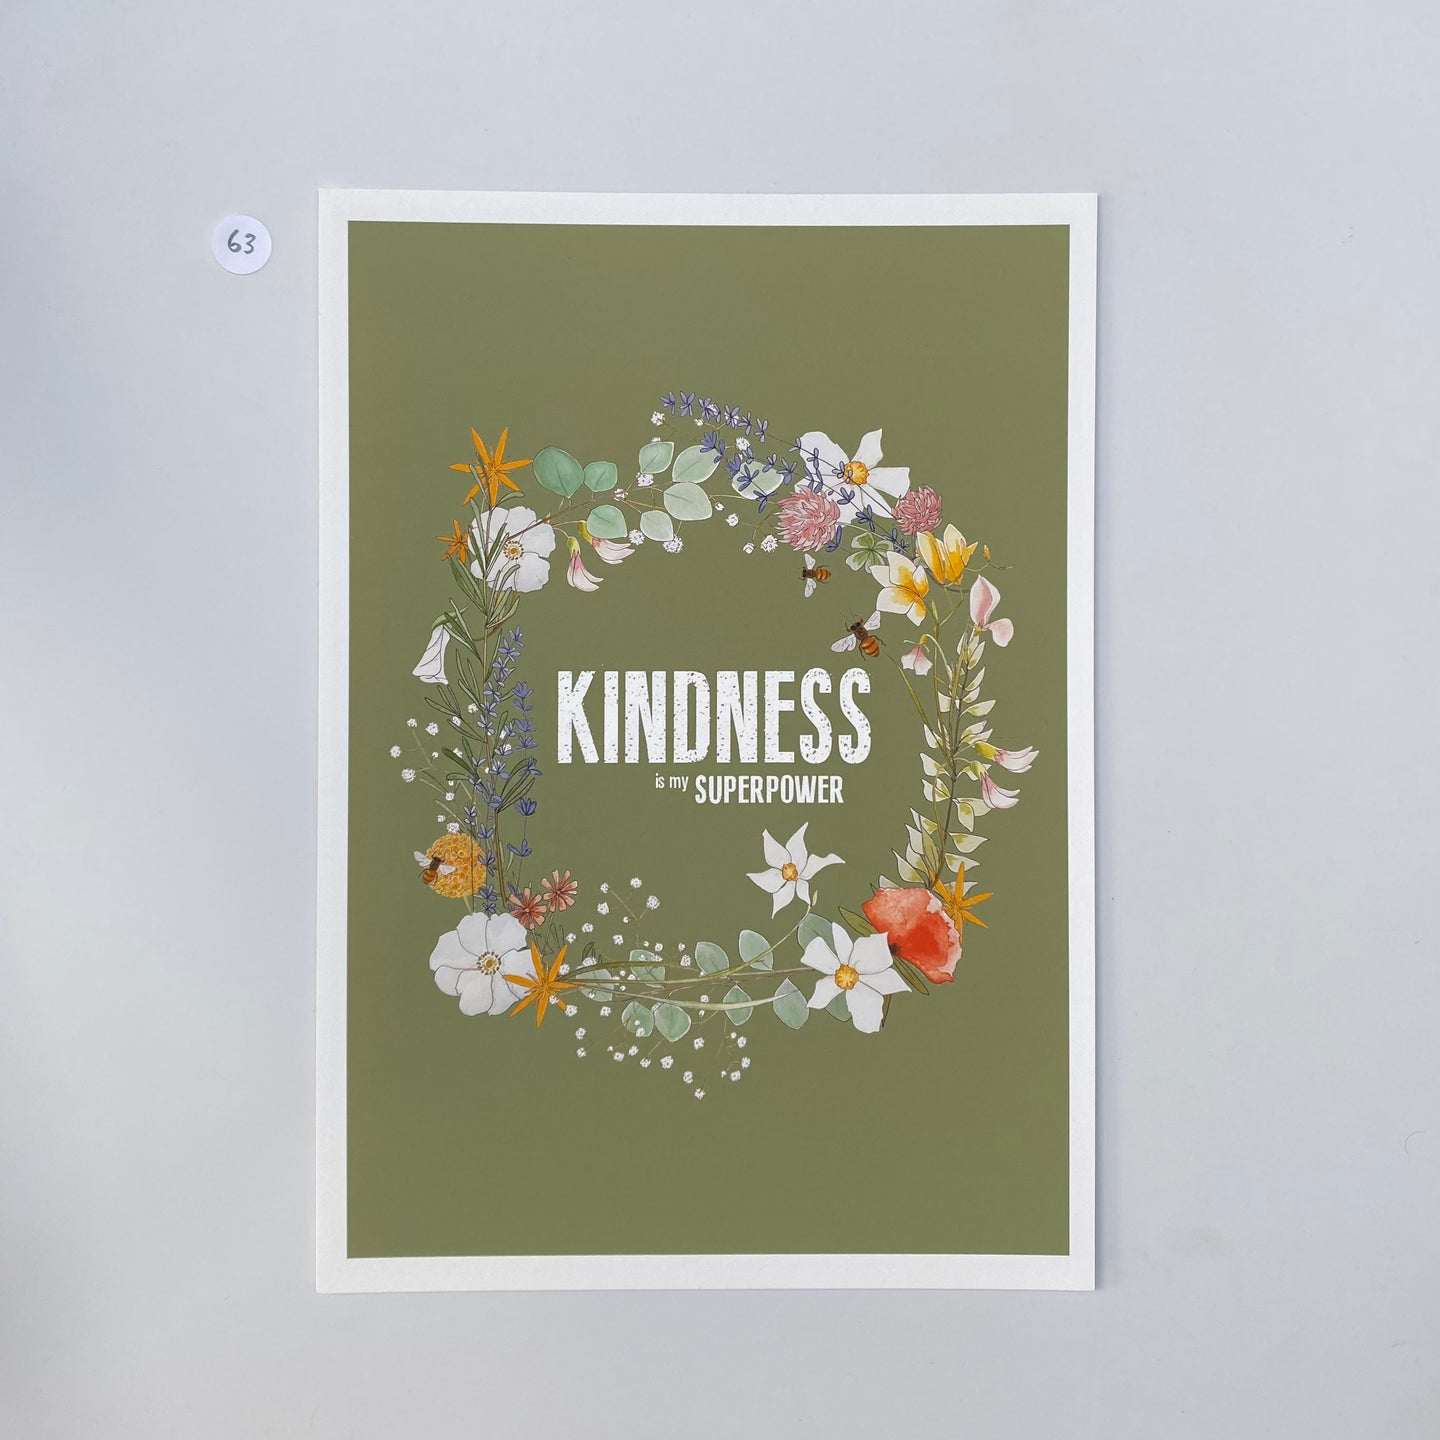 Outlet 63: Kindness is my Superpower - A4